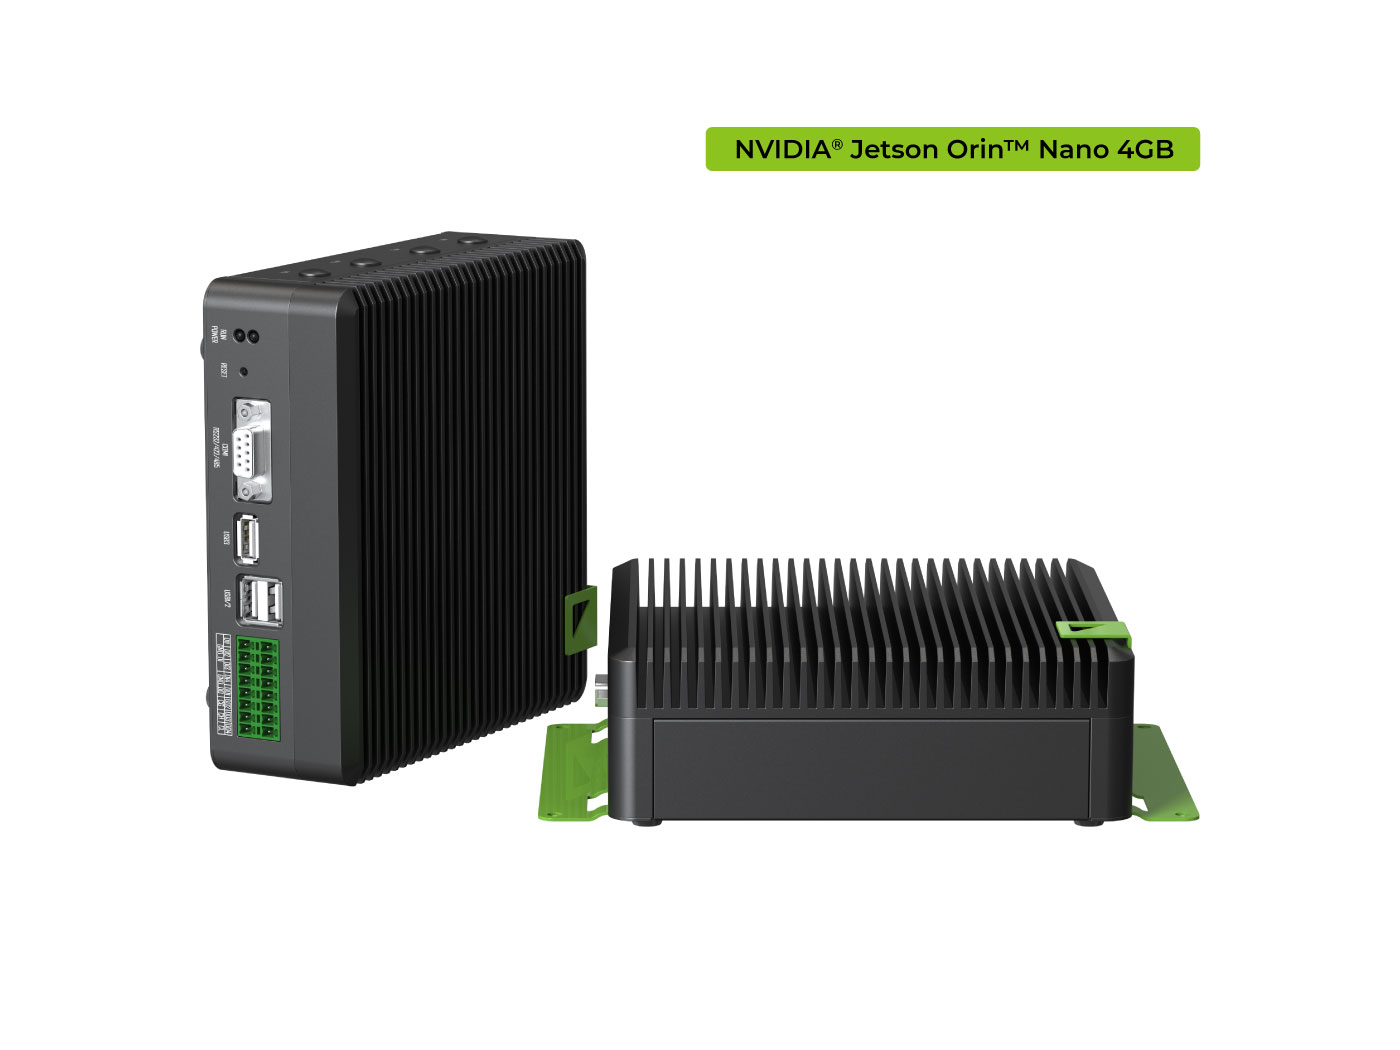 [110110192]reComputer?Industrial?J3010- Fanless Edge AI Device with Jetson Orin™ Nano 4GB module, Aluminum case with passive cooling, 2xRJ45 GbE, 1xRS232/RS-422/RS-485, 4xDI/DO, 1xCAN, 3xUSB3.2, Pre-installed J